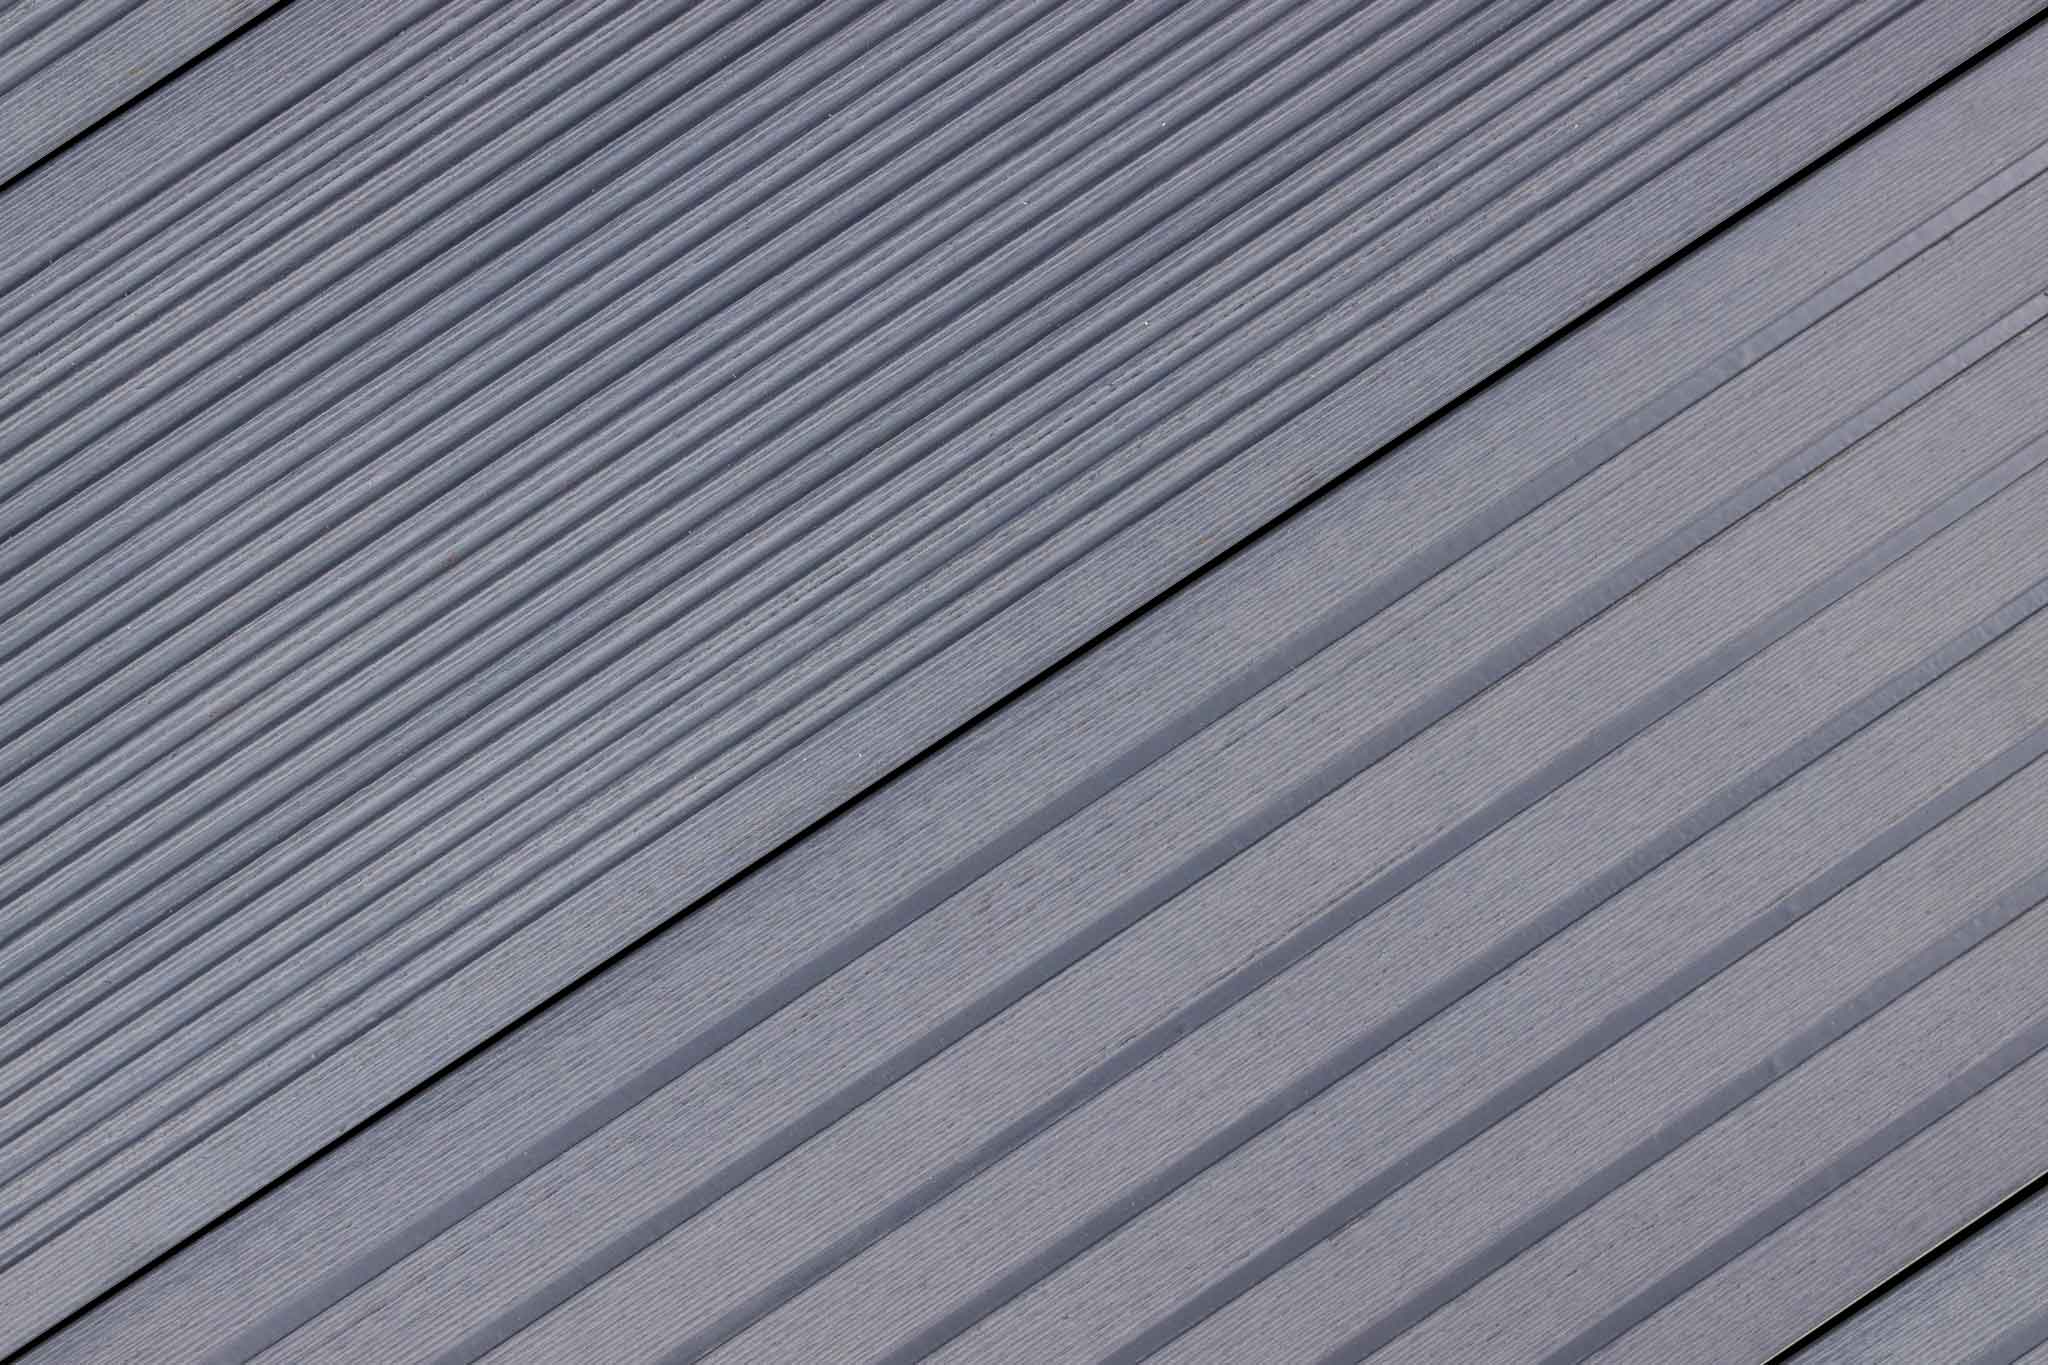 NaturaPlus™ | Light Grey Grooved Composite Decking Board (3m length)